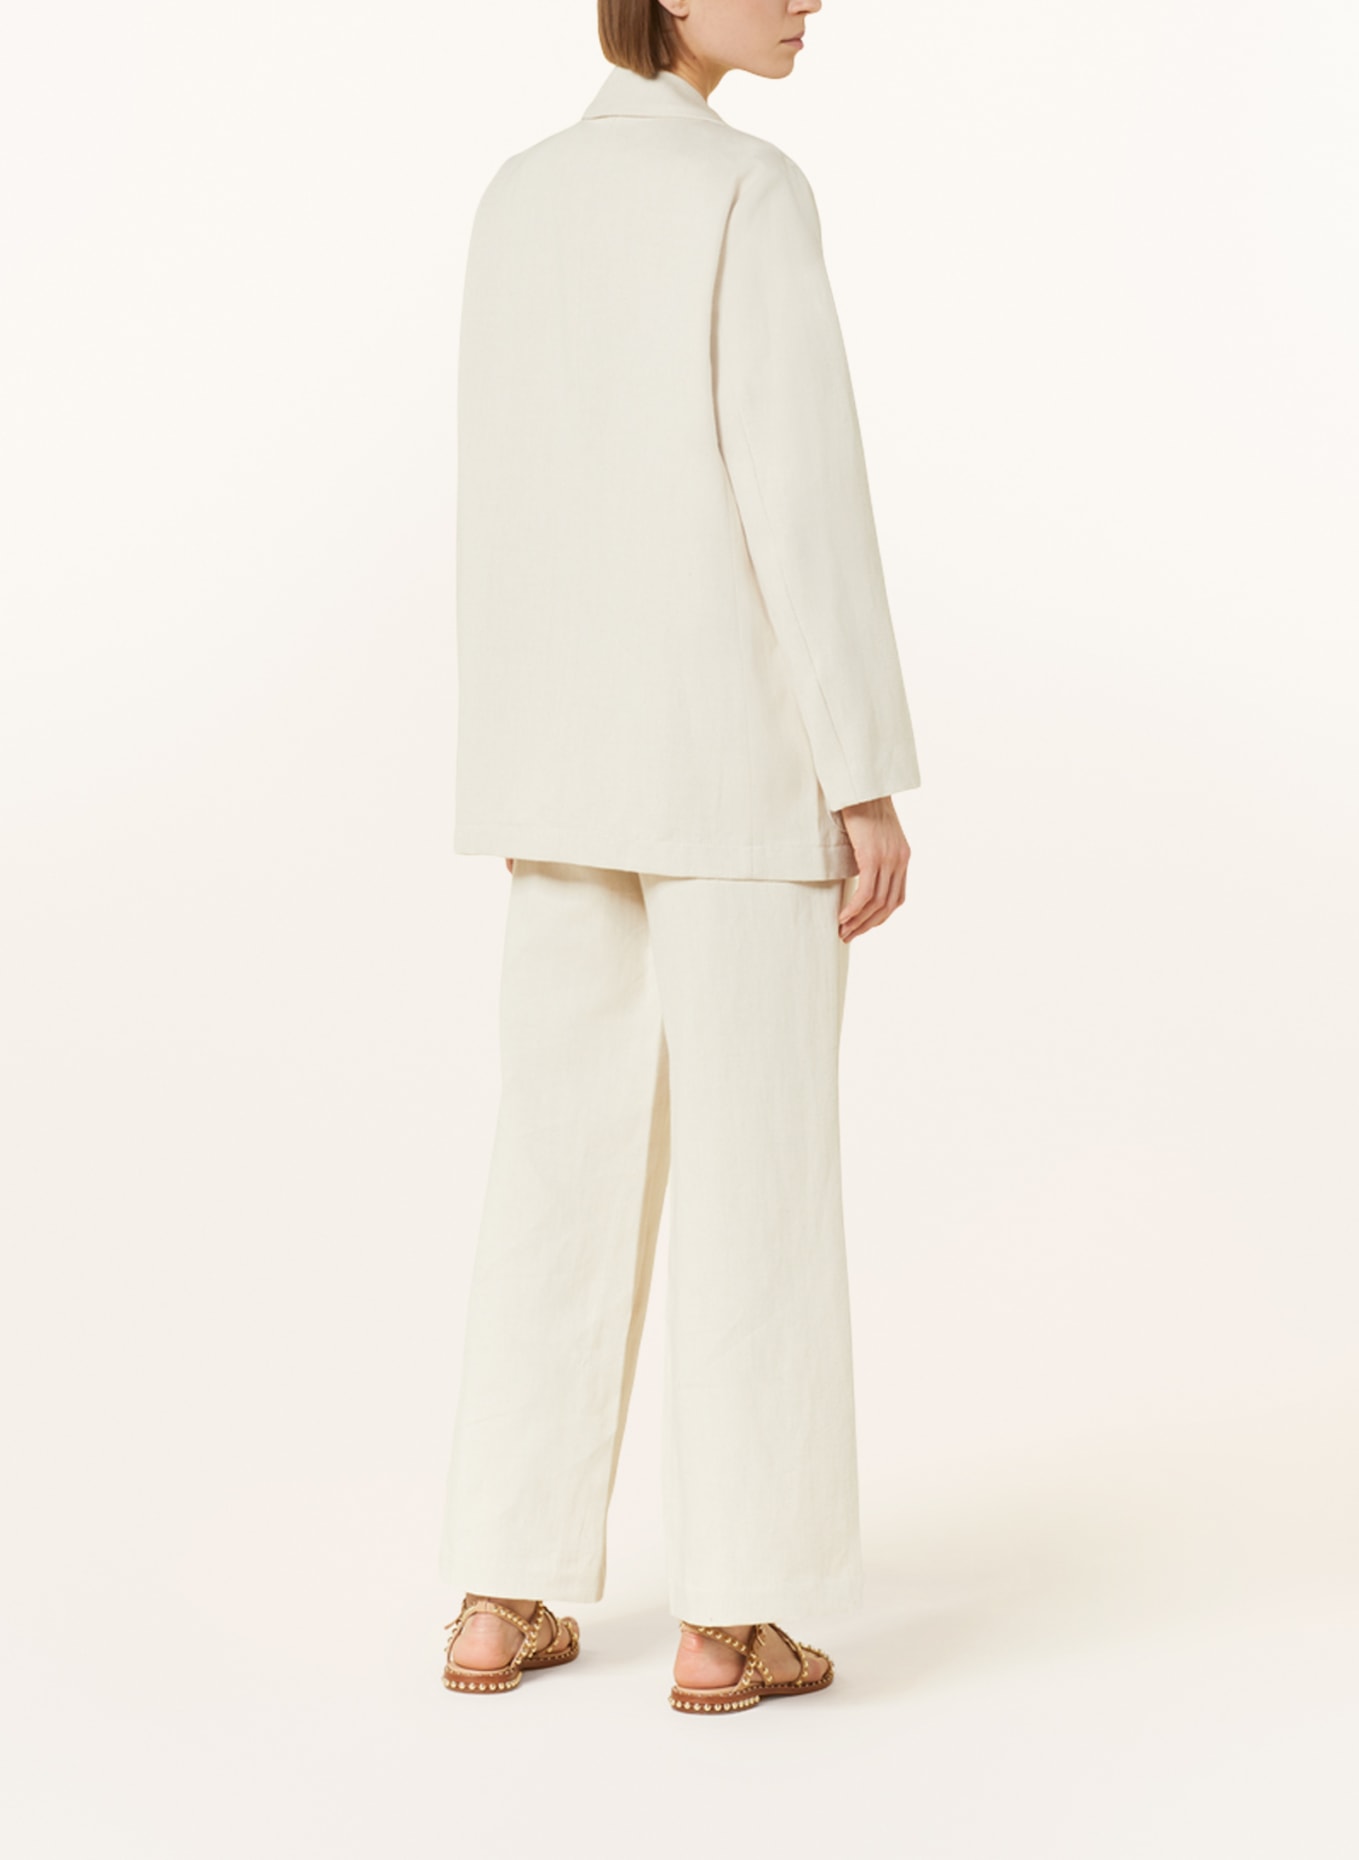 GITTA BANKO Trousers with linen, Color: CREAM (Image 3)